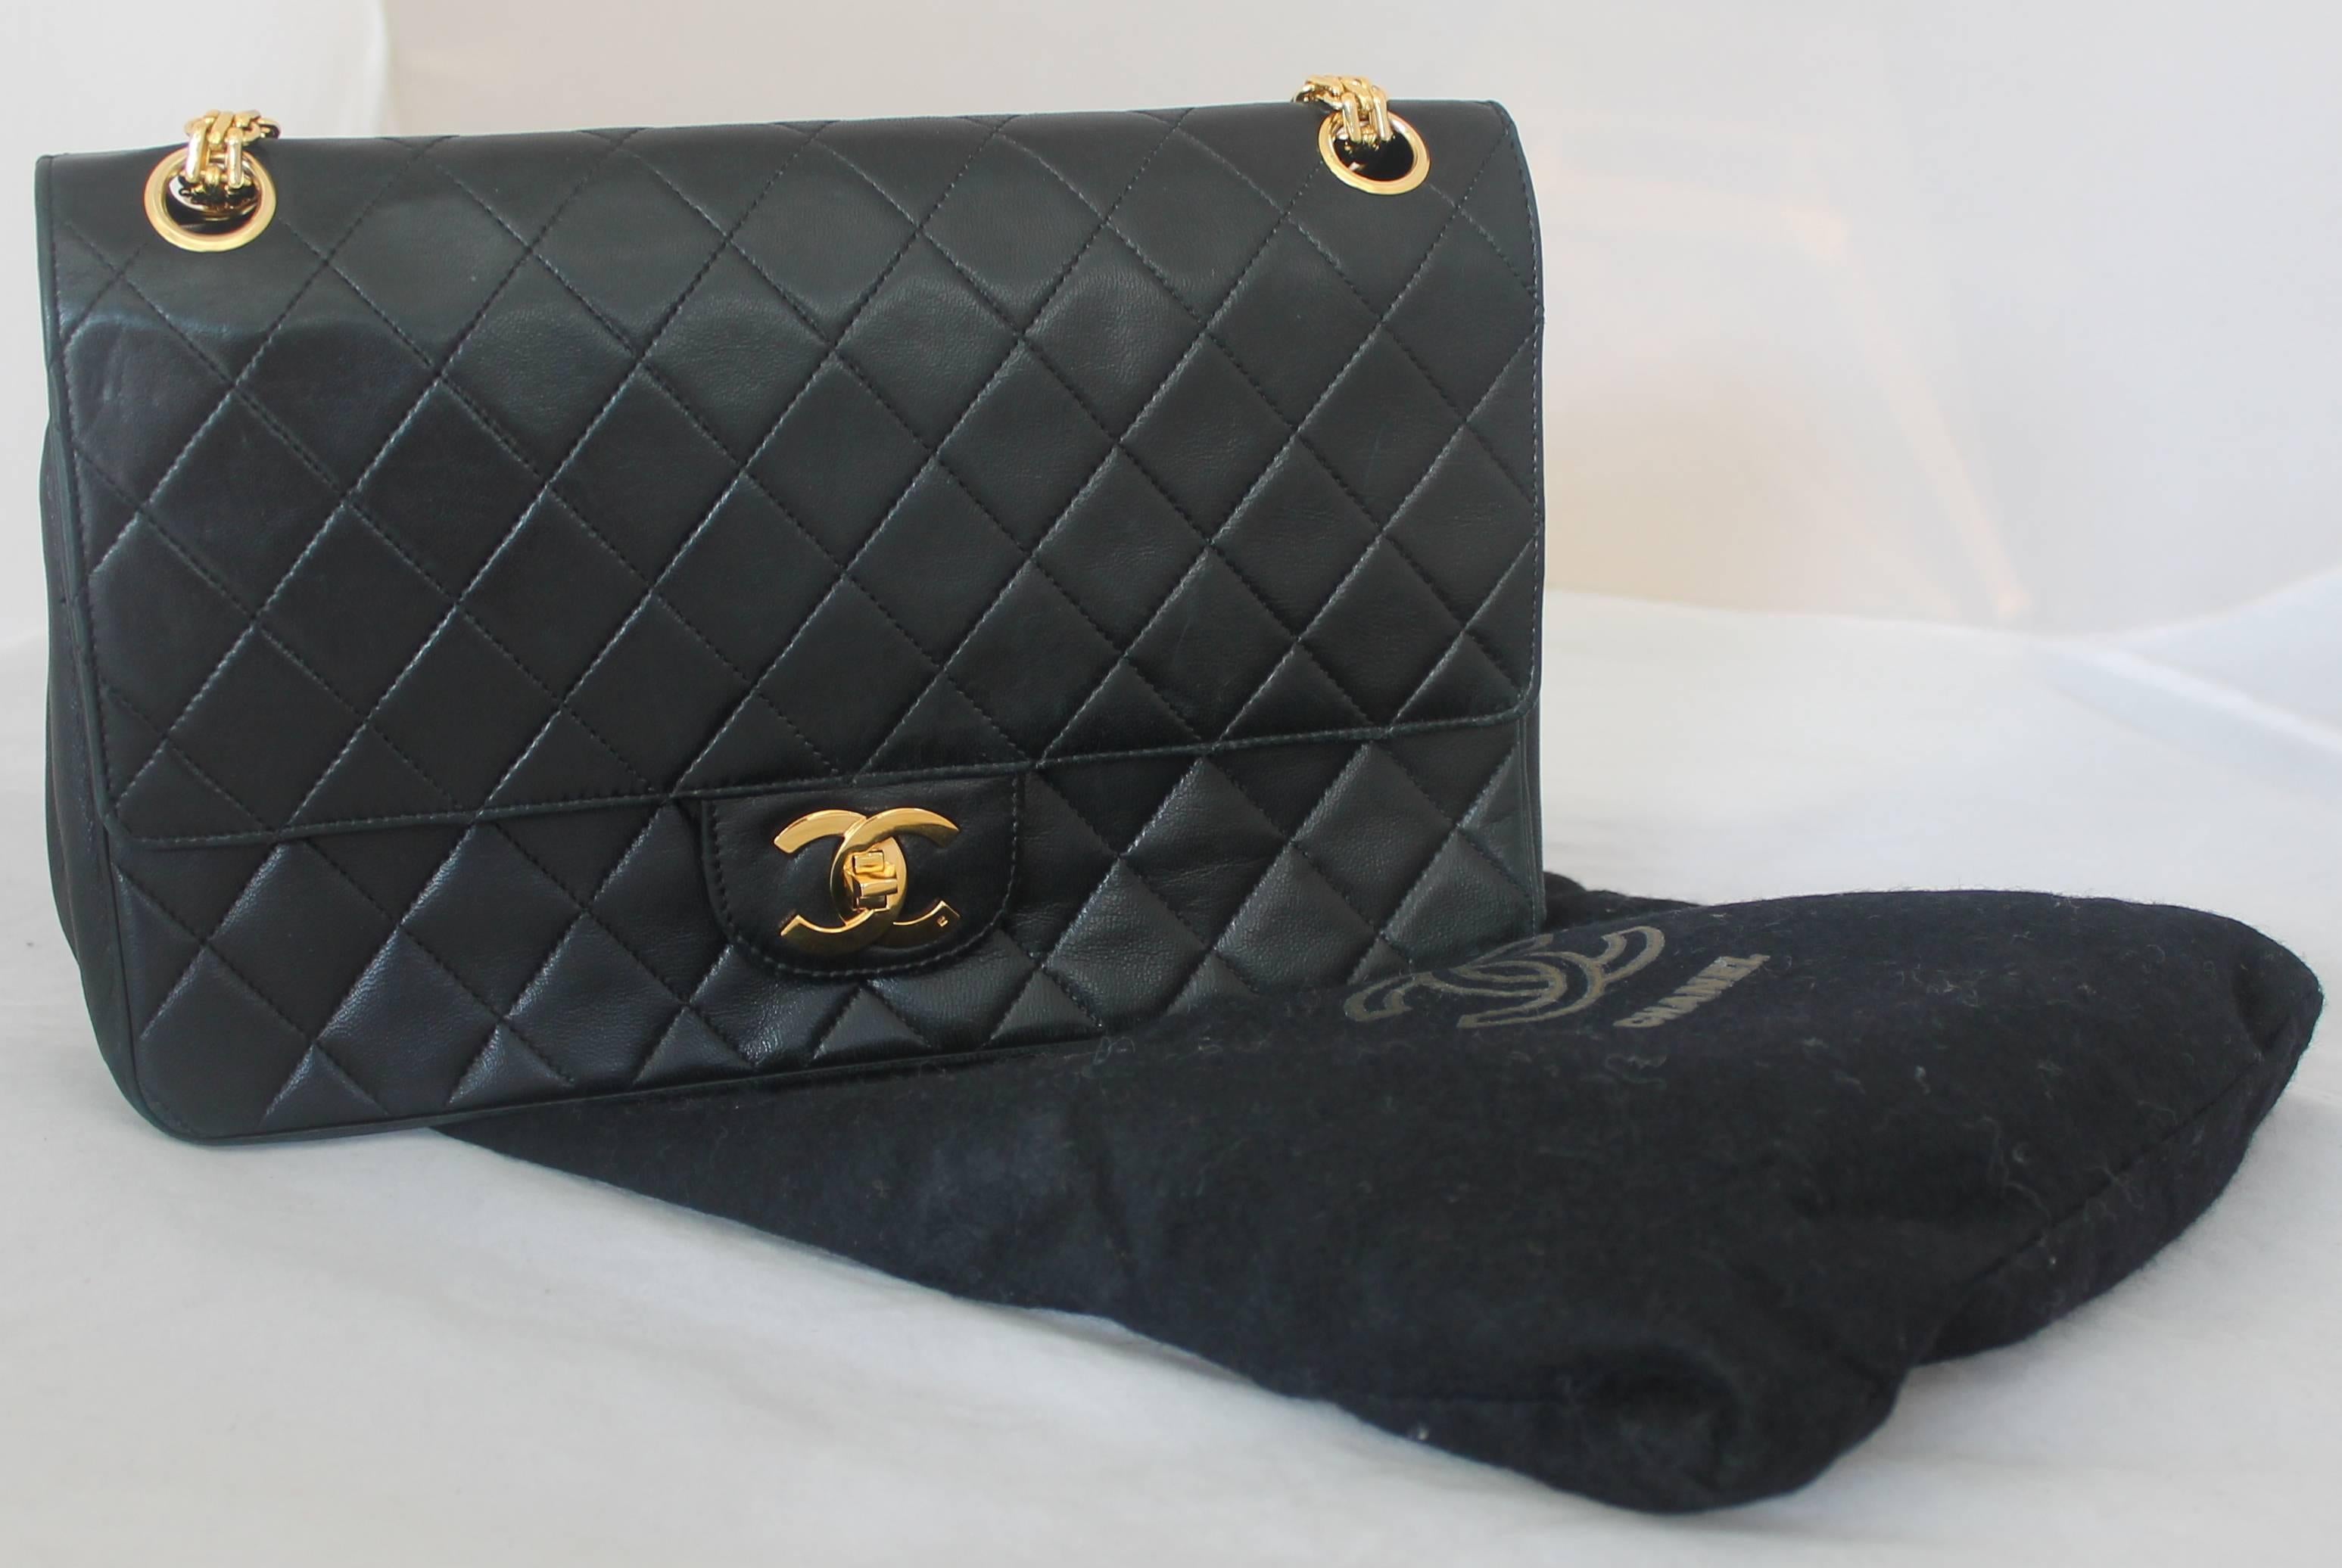 Women's Chanel Black Quilted Lambskin Classic Double Flap Handbag - GHW - Circa 1980's